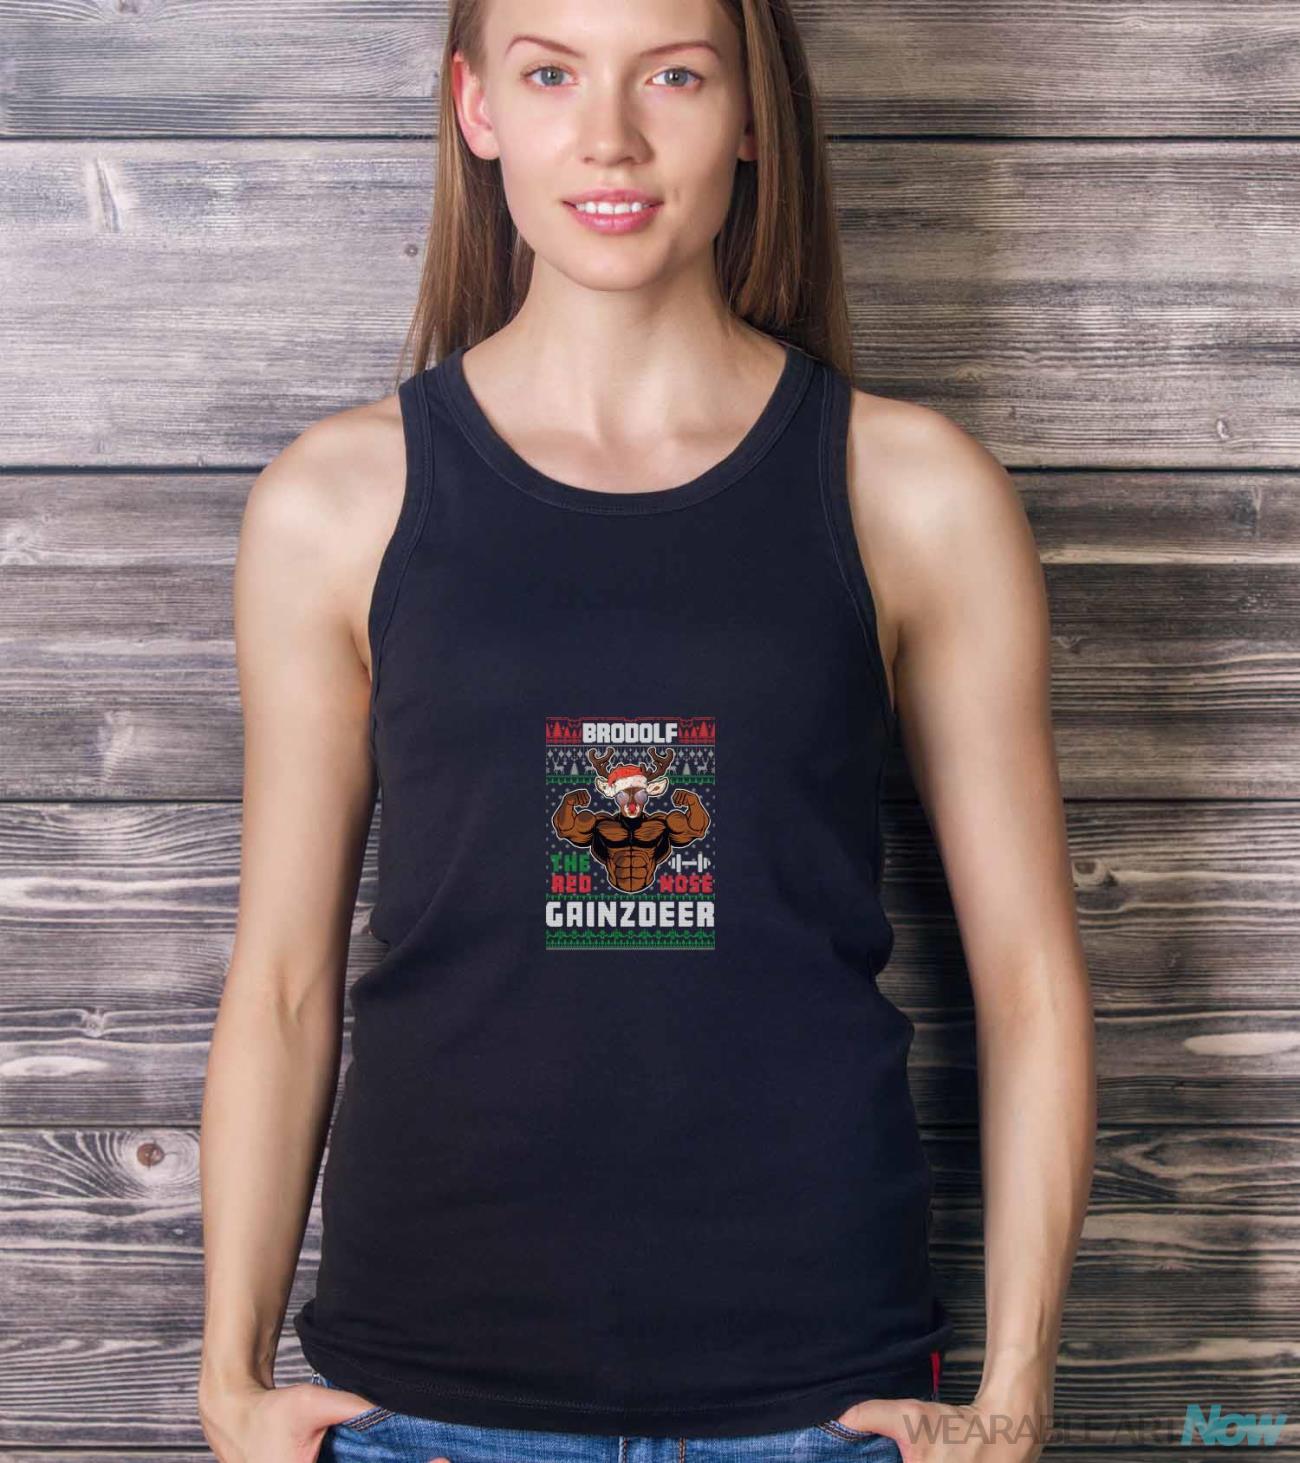 Brodolf The Red Nose Gainzdeer Gym Ugly Christmas Sweater Shirt - Ladies Tank Top